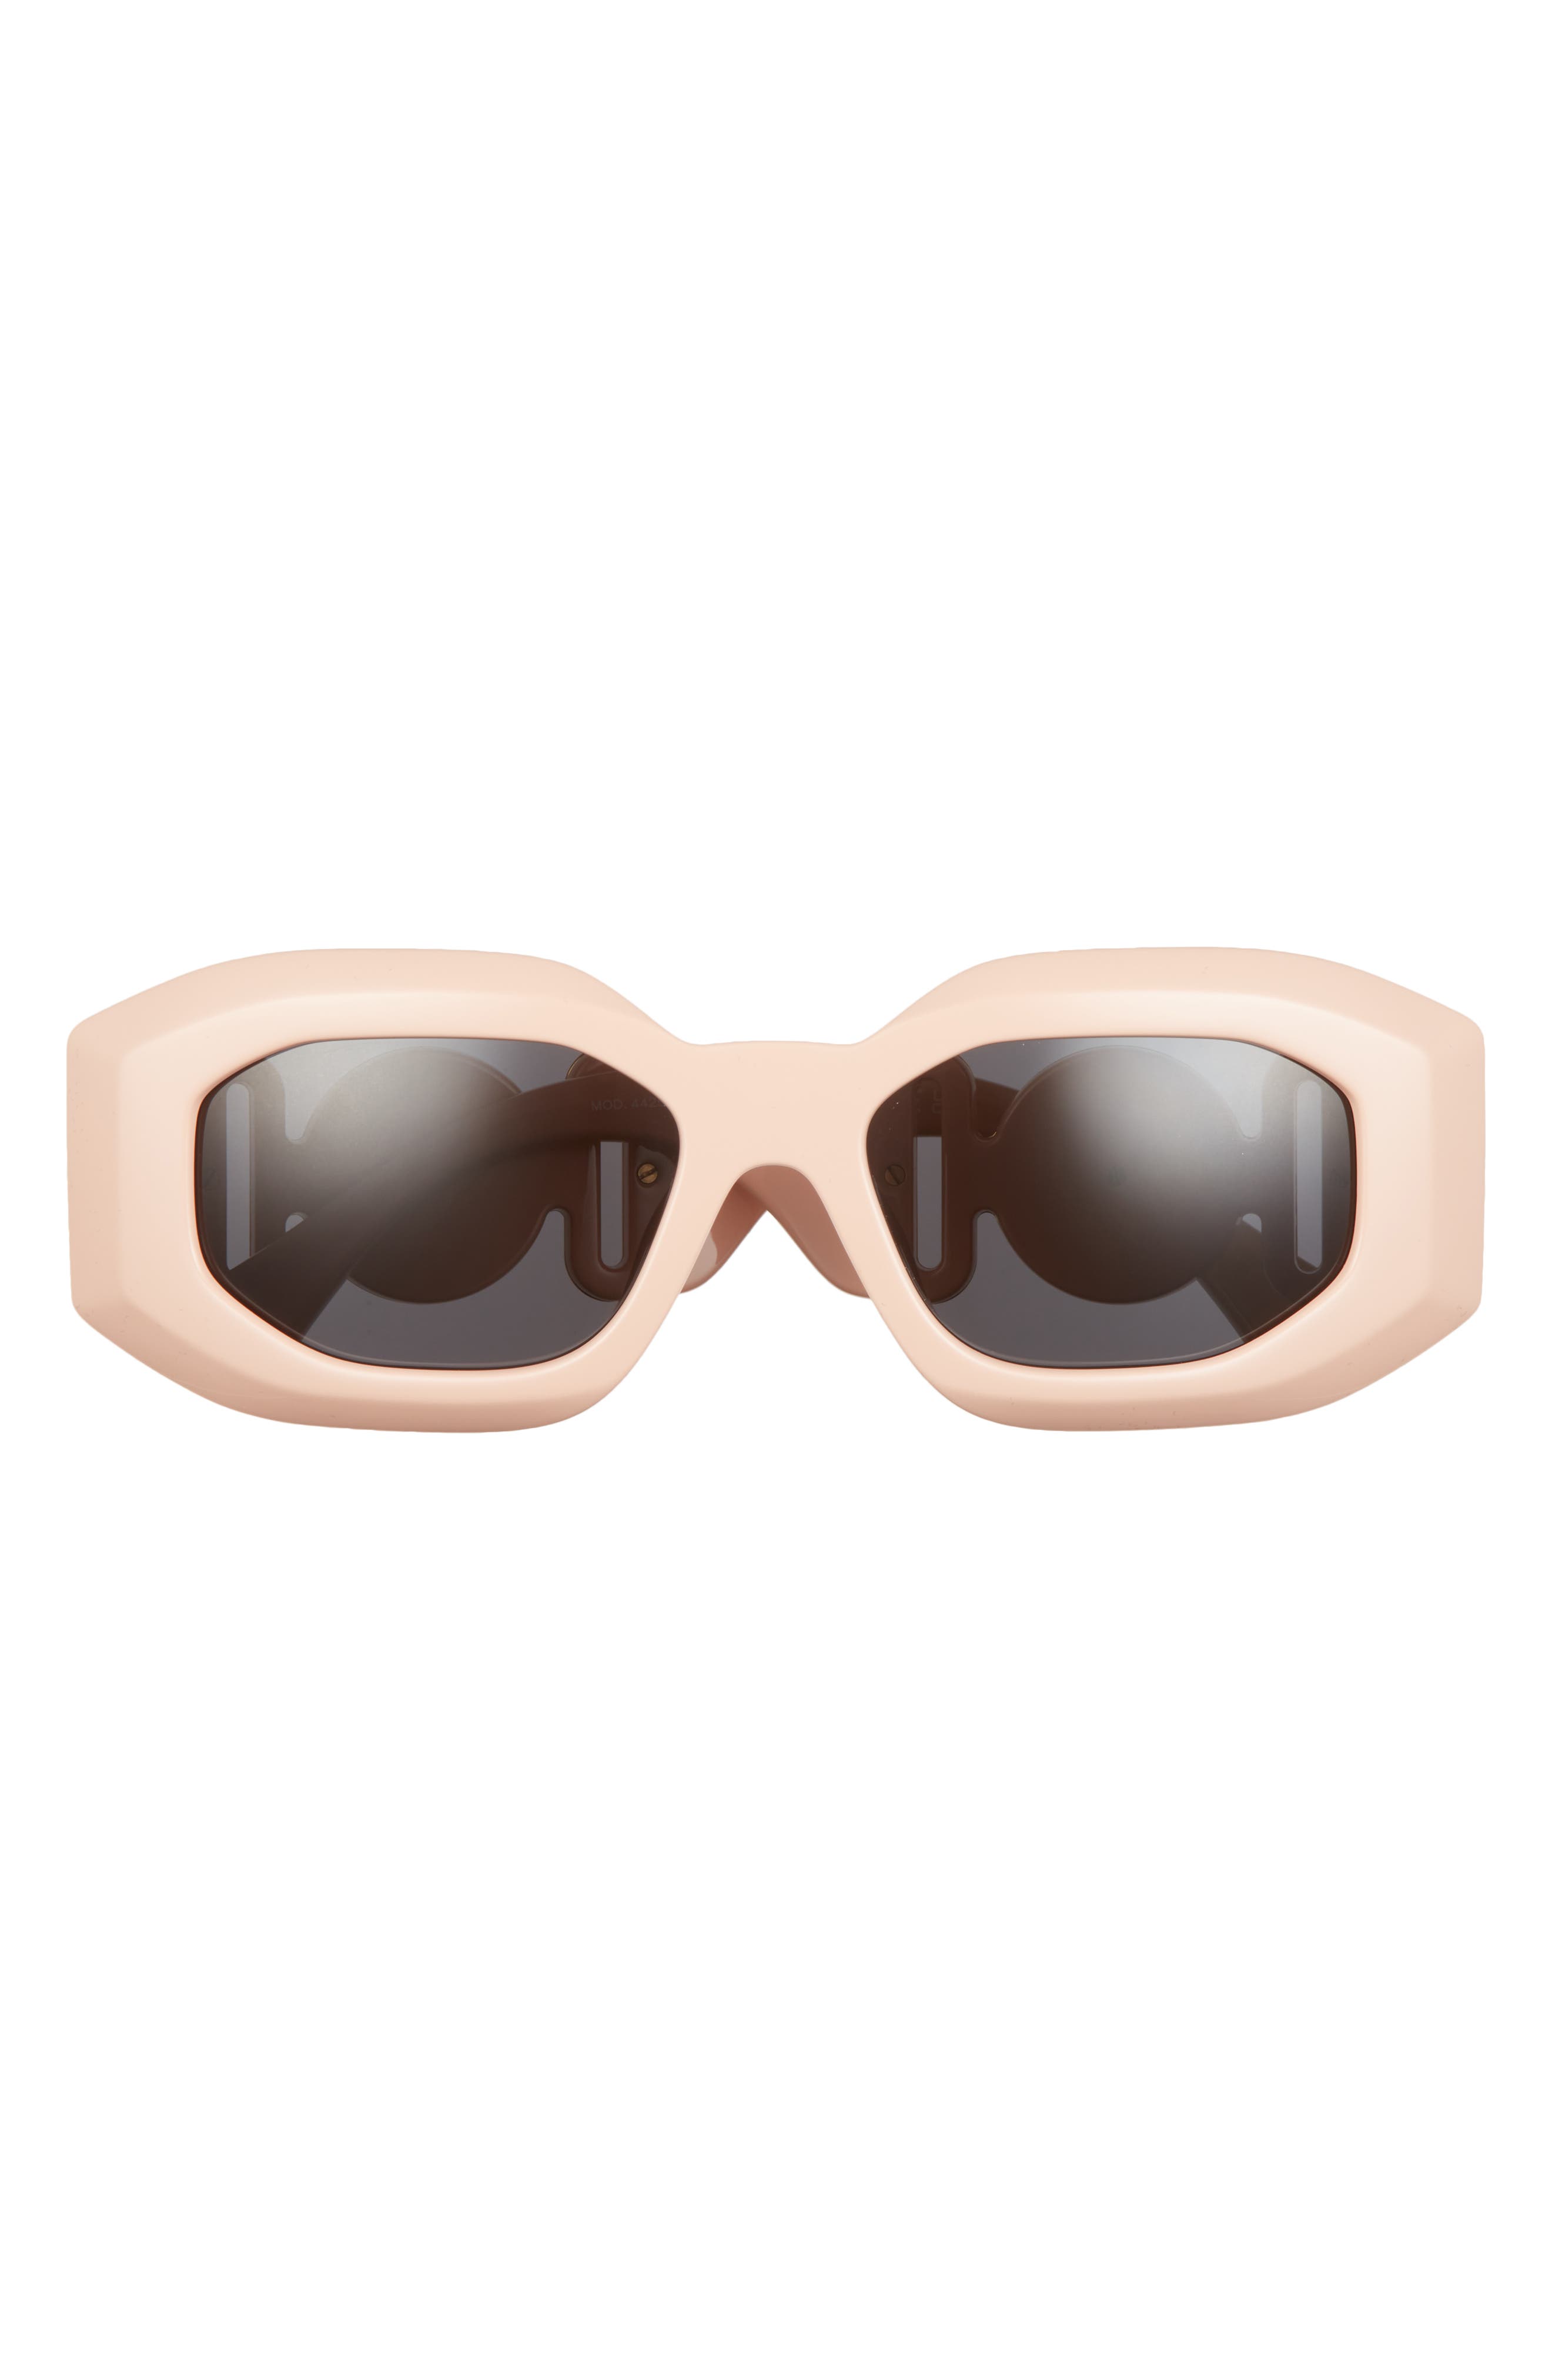 Smith Domino Pink Sunglasses w/ Clear Mirror Lens 